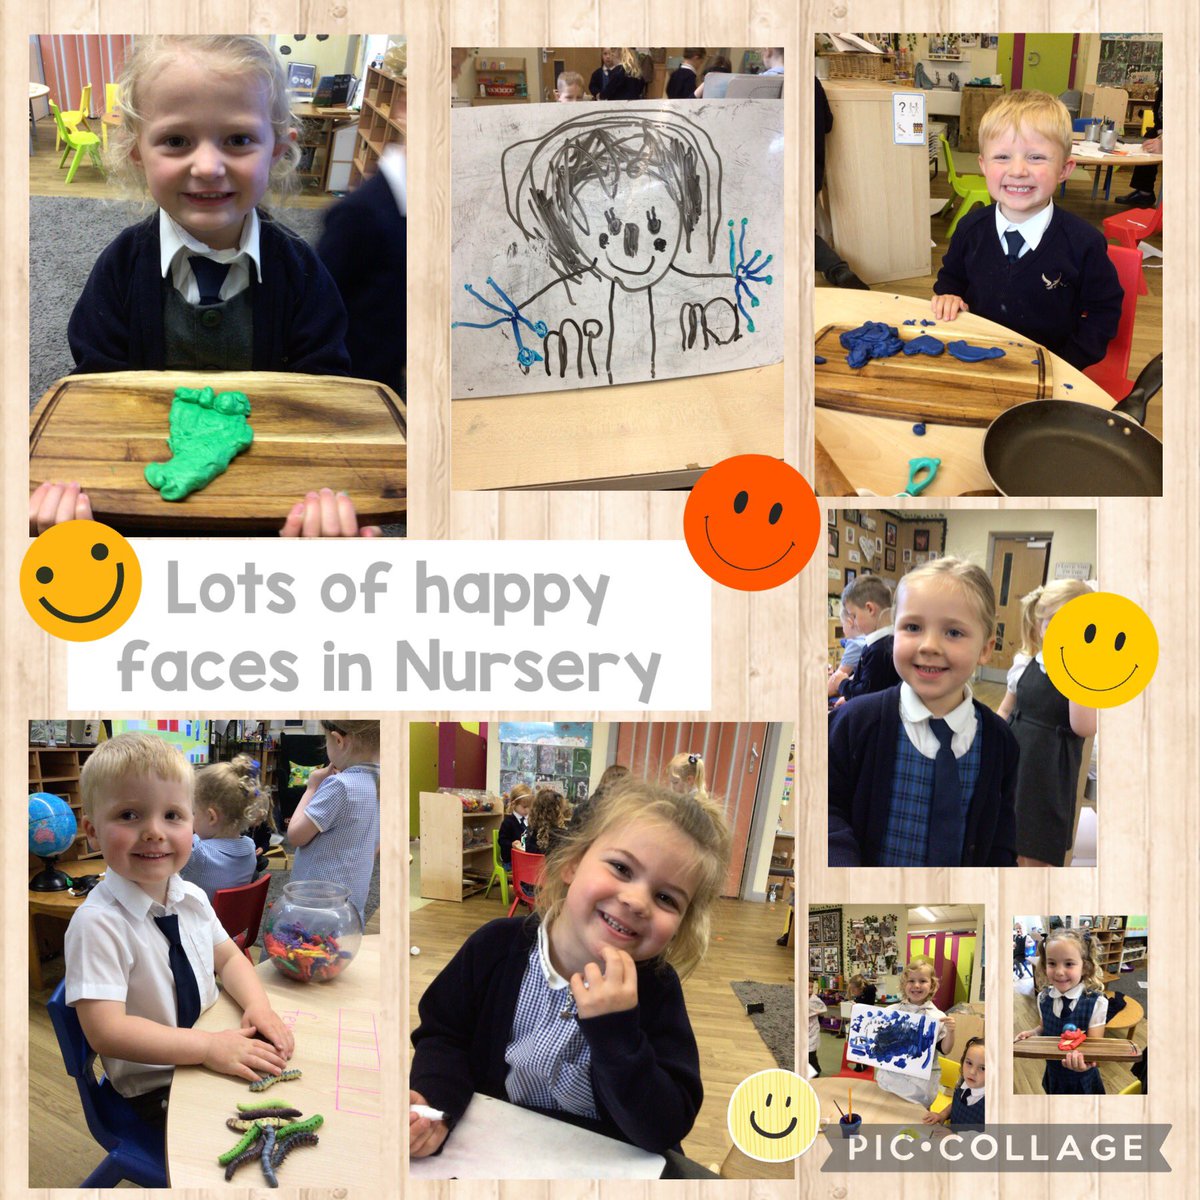 What a wonderful day we’re having in Curious Creators! ☺️
What makes us happy?  #PSED What makes you happy? 😊
#EYFS #FS1